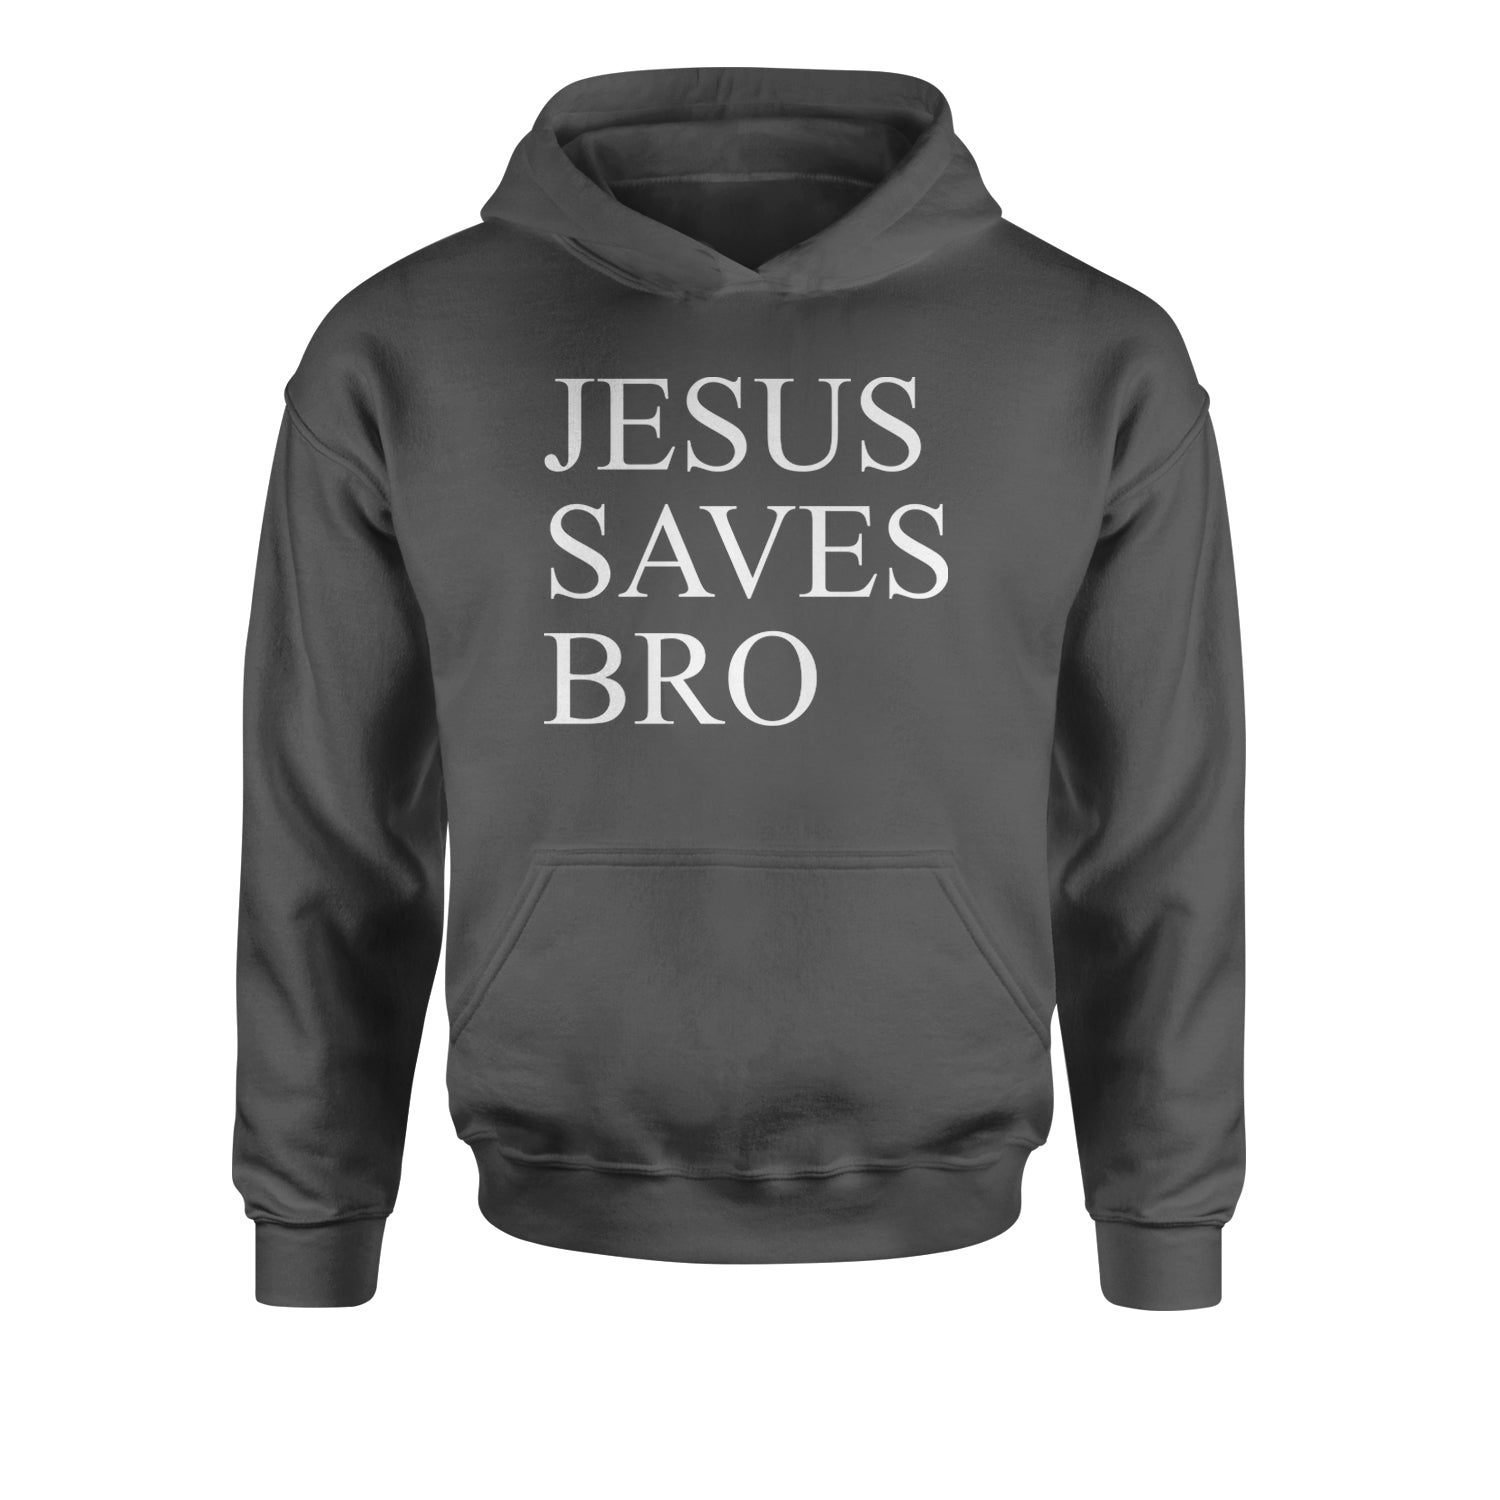 Jesus Saves Bro Youth-Sized Hoodie catholic, christian, christianity, church, jesus, religion, religuous by Expression Tees